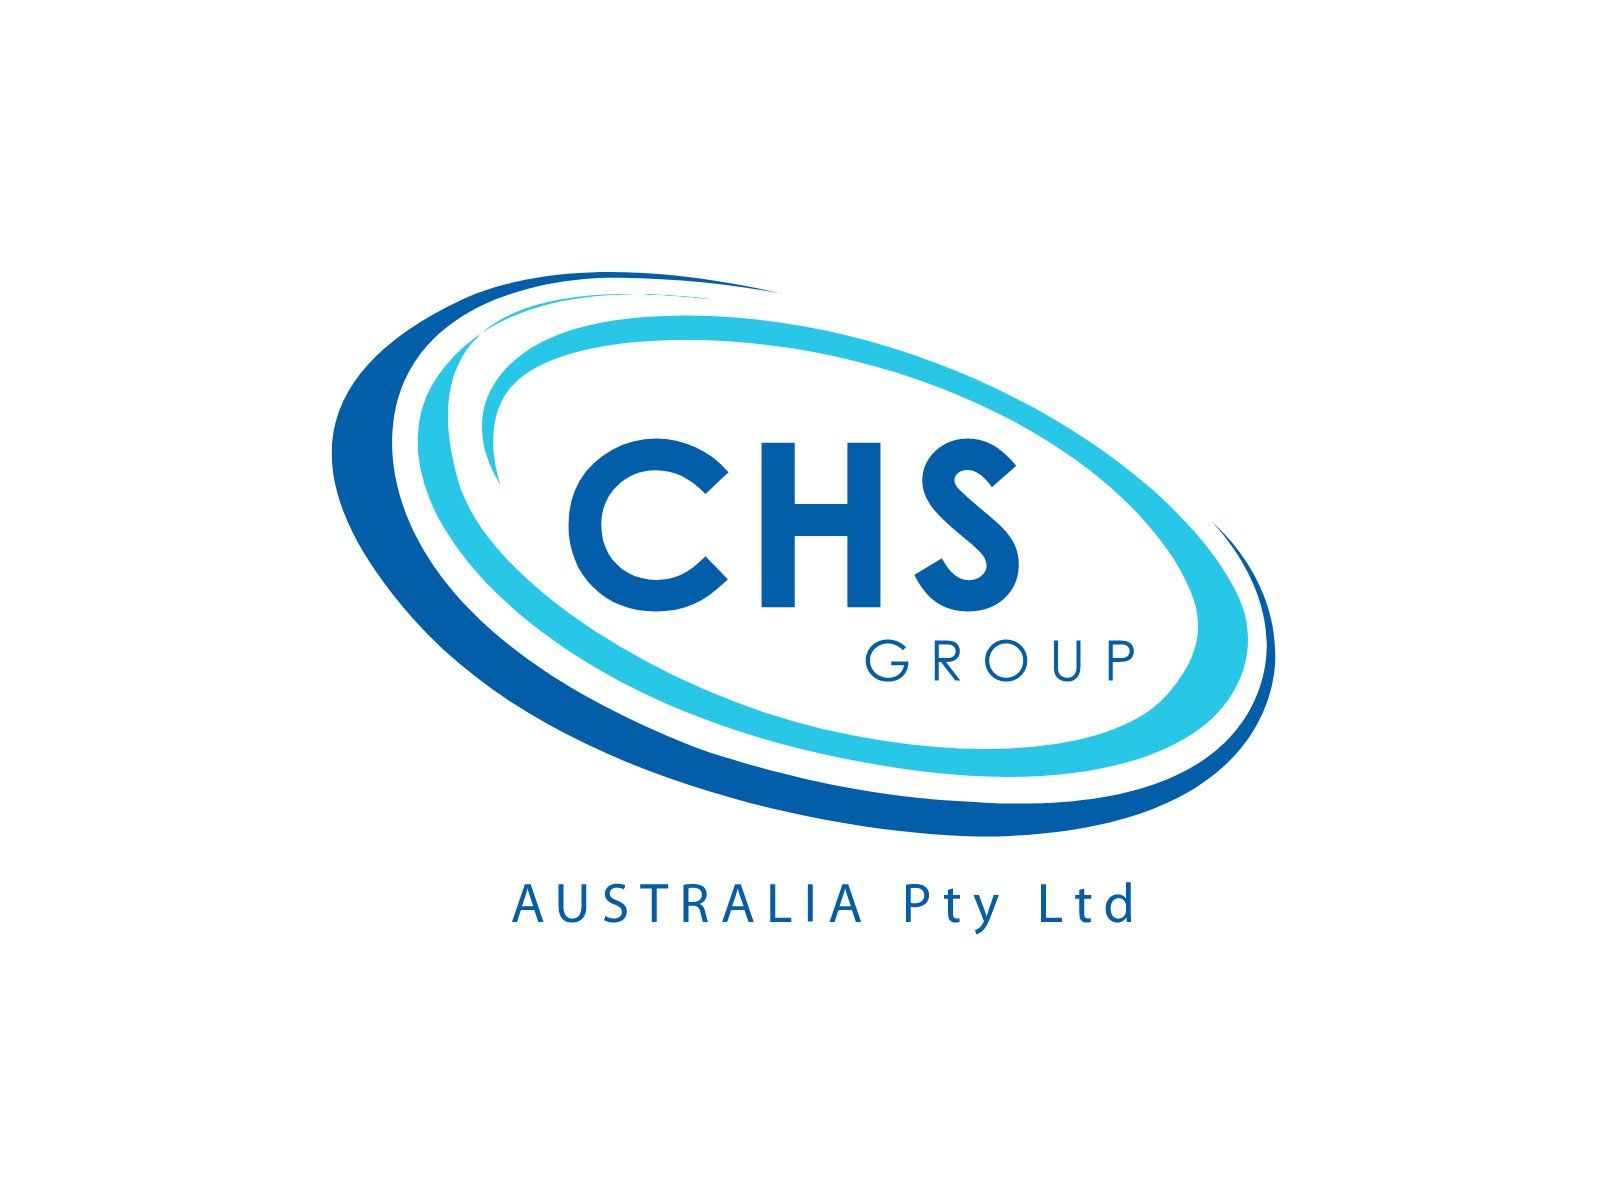 Contact Chs Group